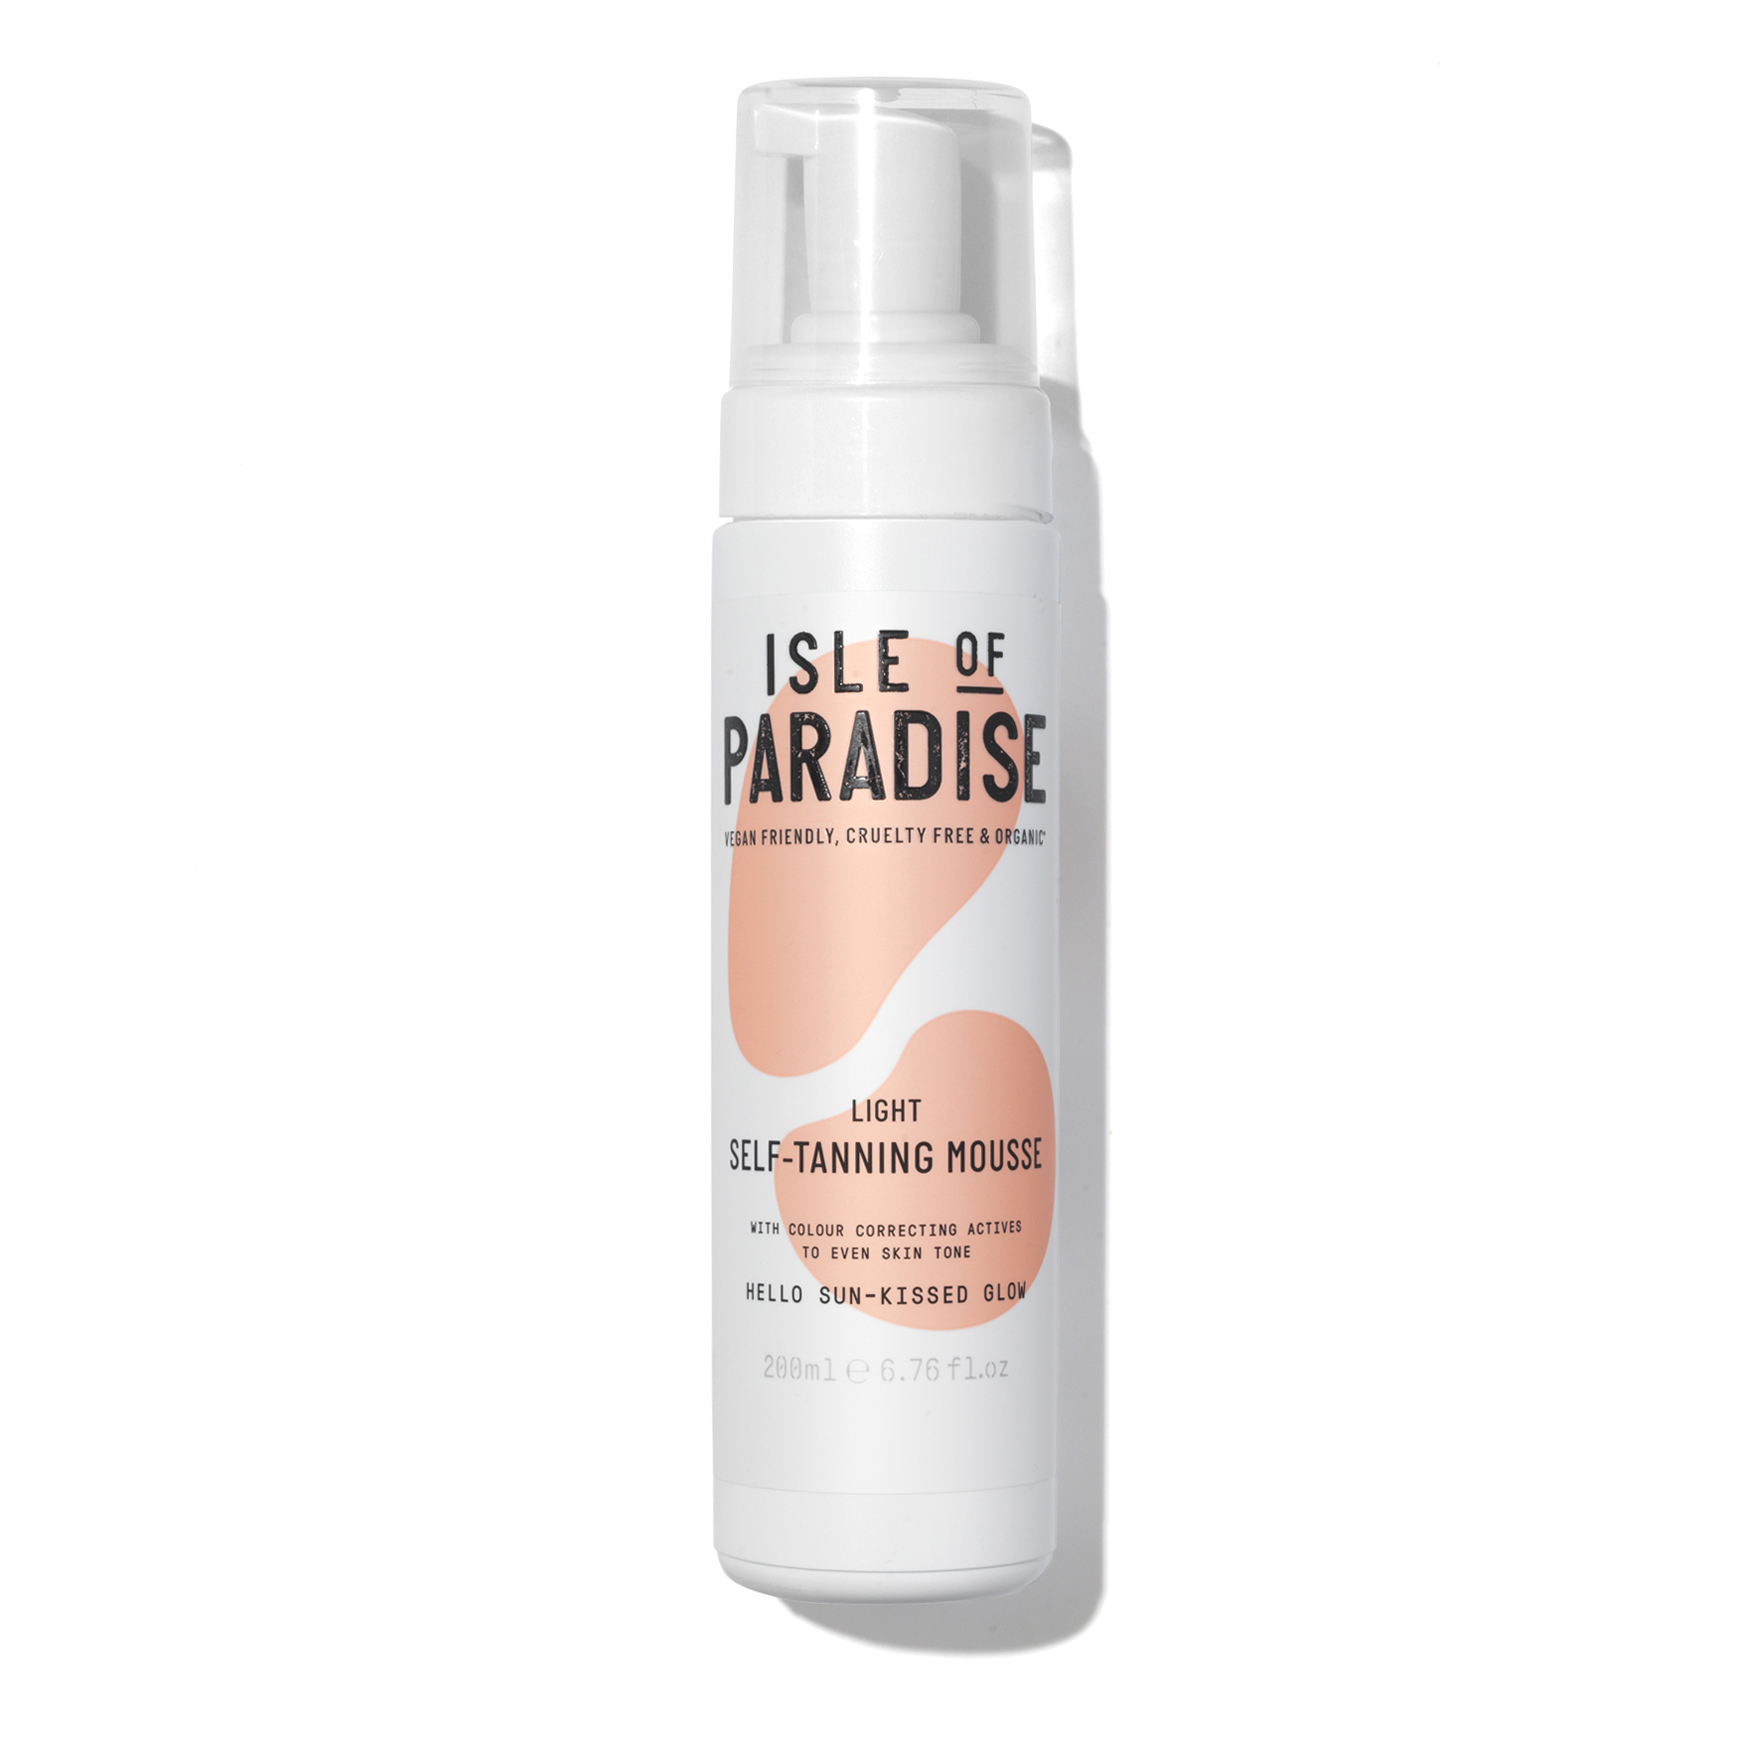 Isle of Paradise Self-Tanning Mousse | Space NK